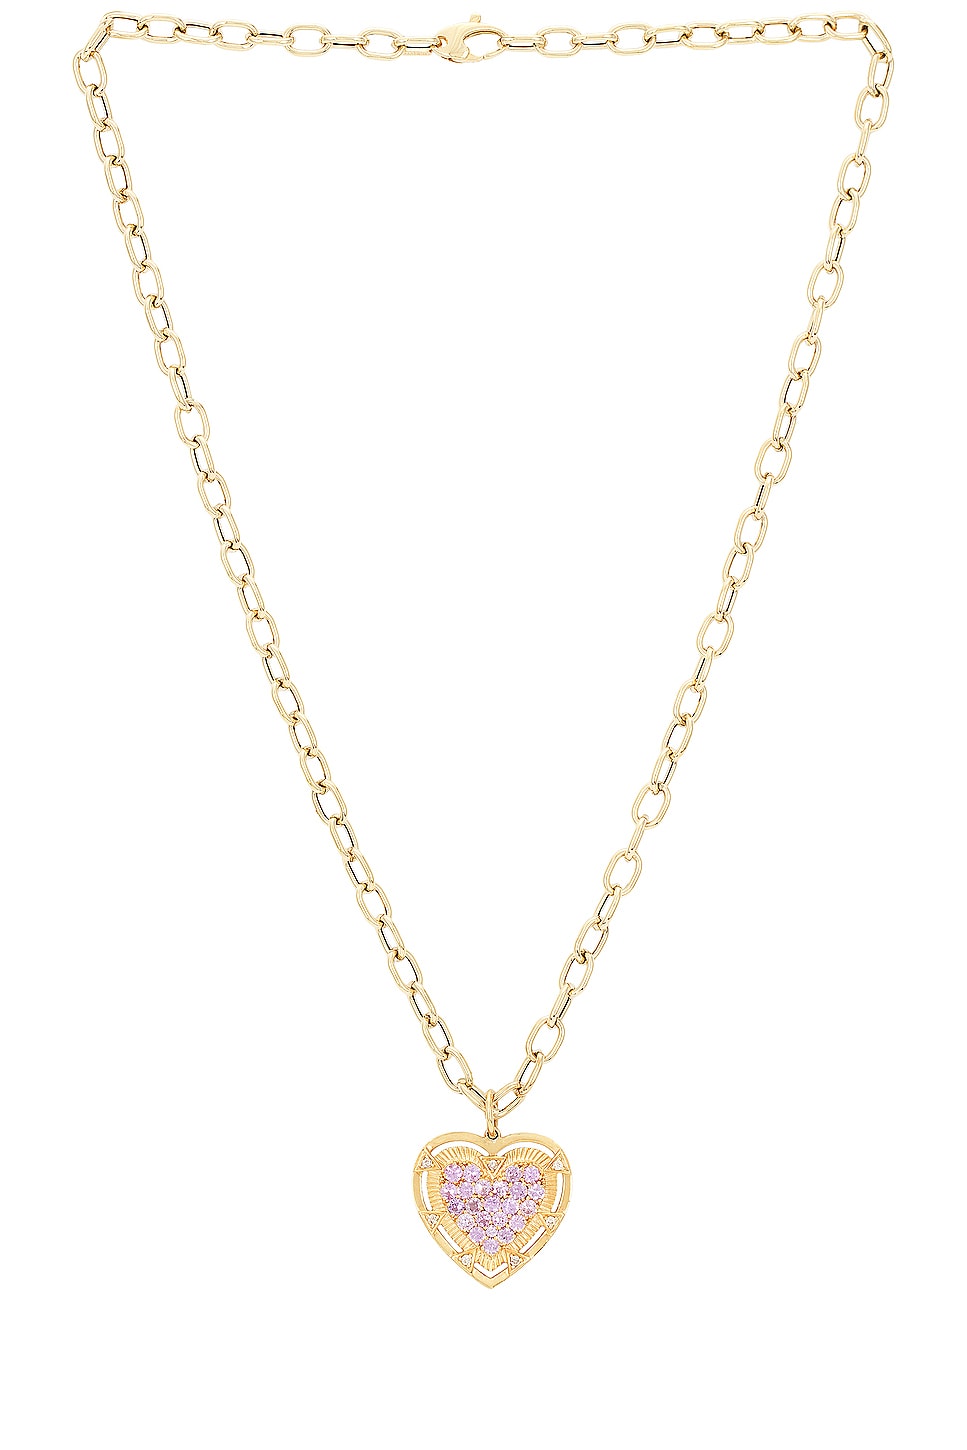 Image 1 of Siena Jewelry Heart Charm Necklace in 14k Yellow Gold, Diamond, & Pink Sapphire